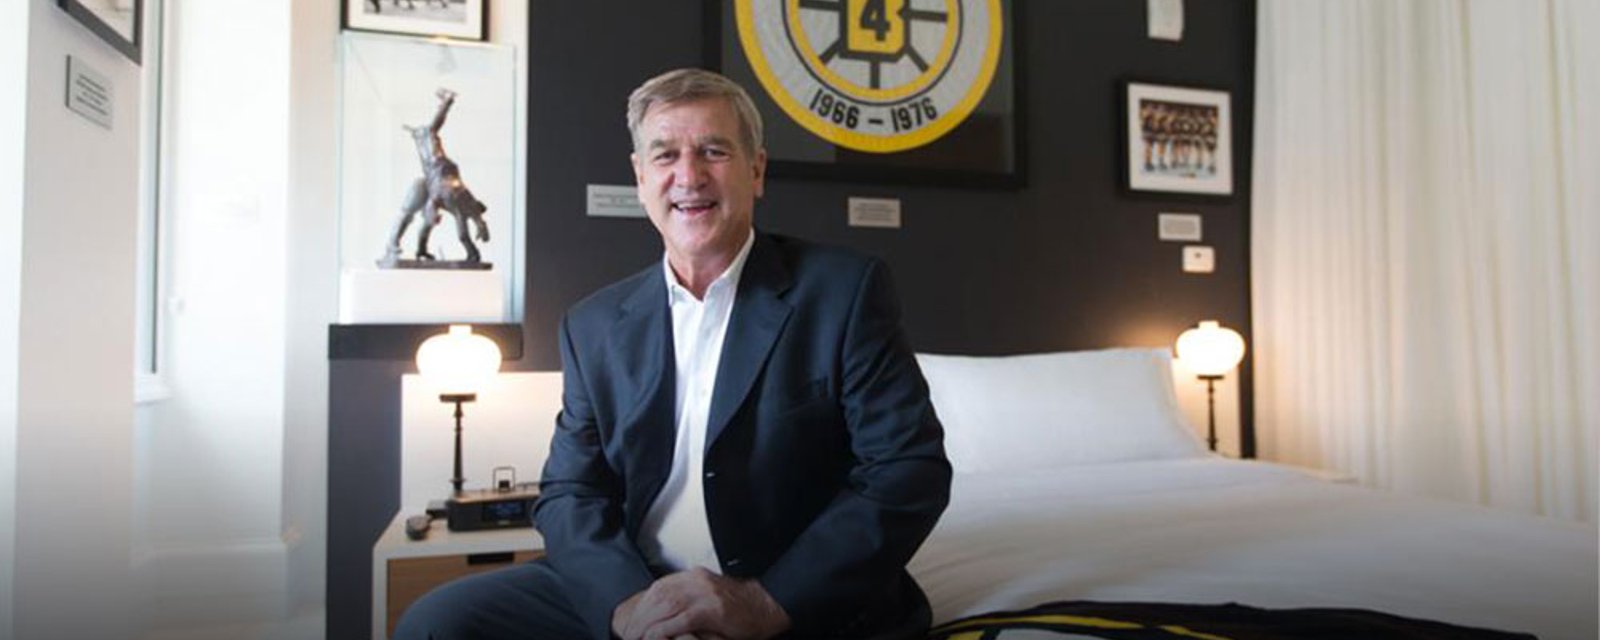 A must stay for Bruins fans: The Bobby Orr Suite